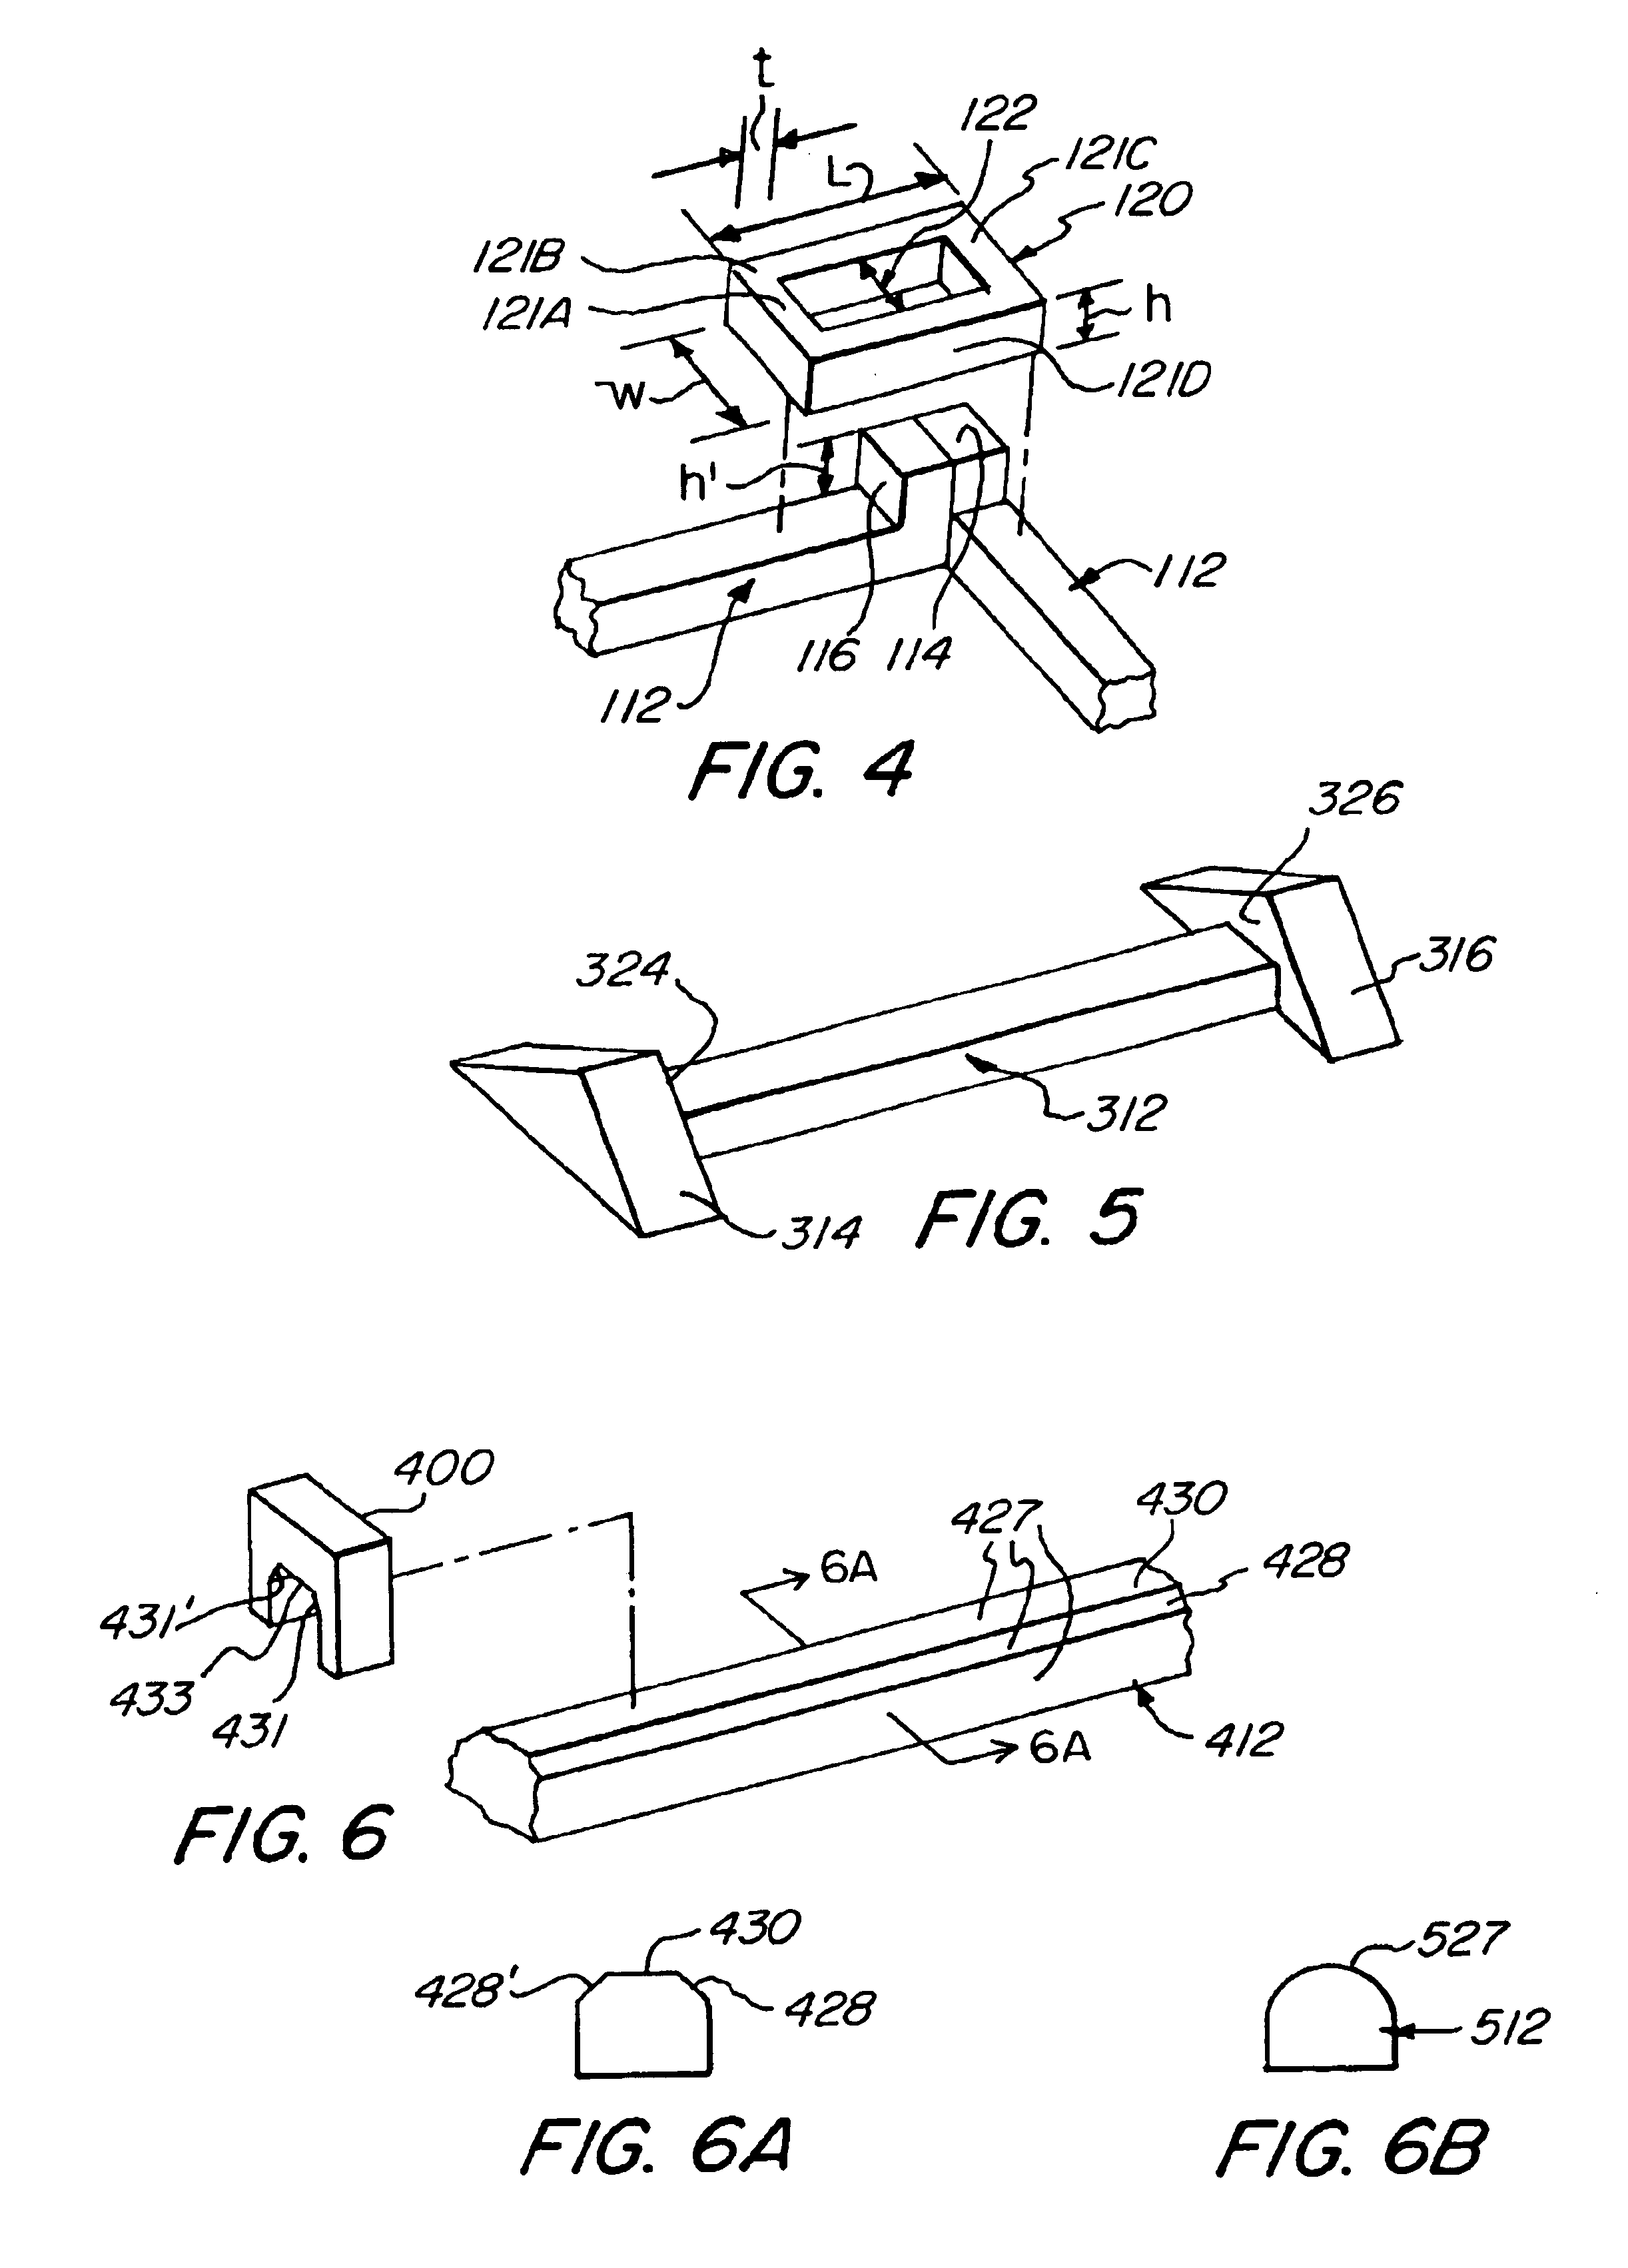 Coupling device for coupling instrument organizers with movable stabilizing posts together